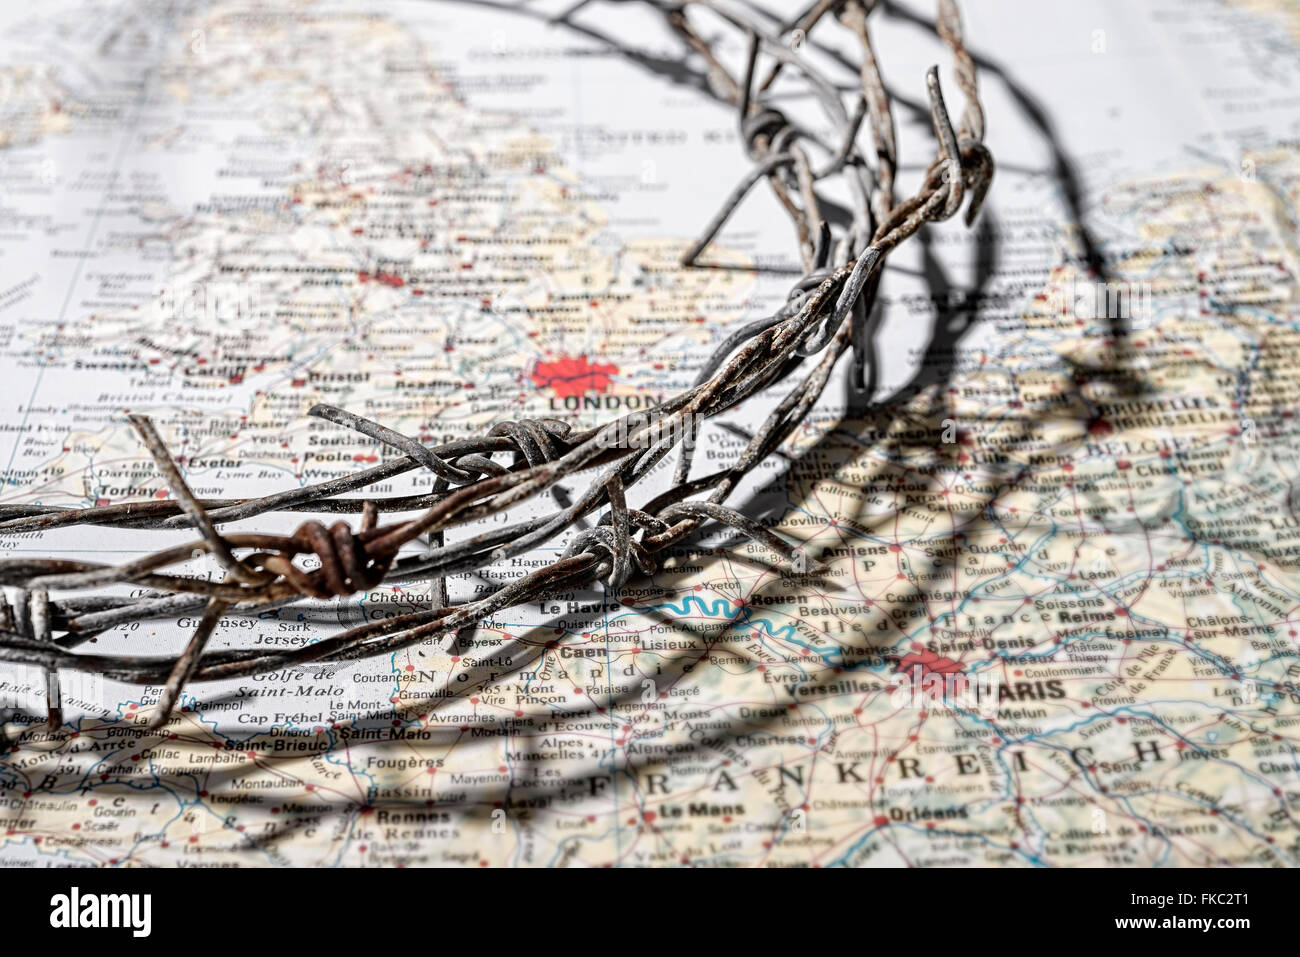 Europe Map with barbed wire between Britain and the Continent Stock Photo